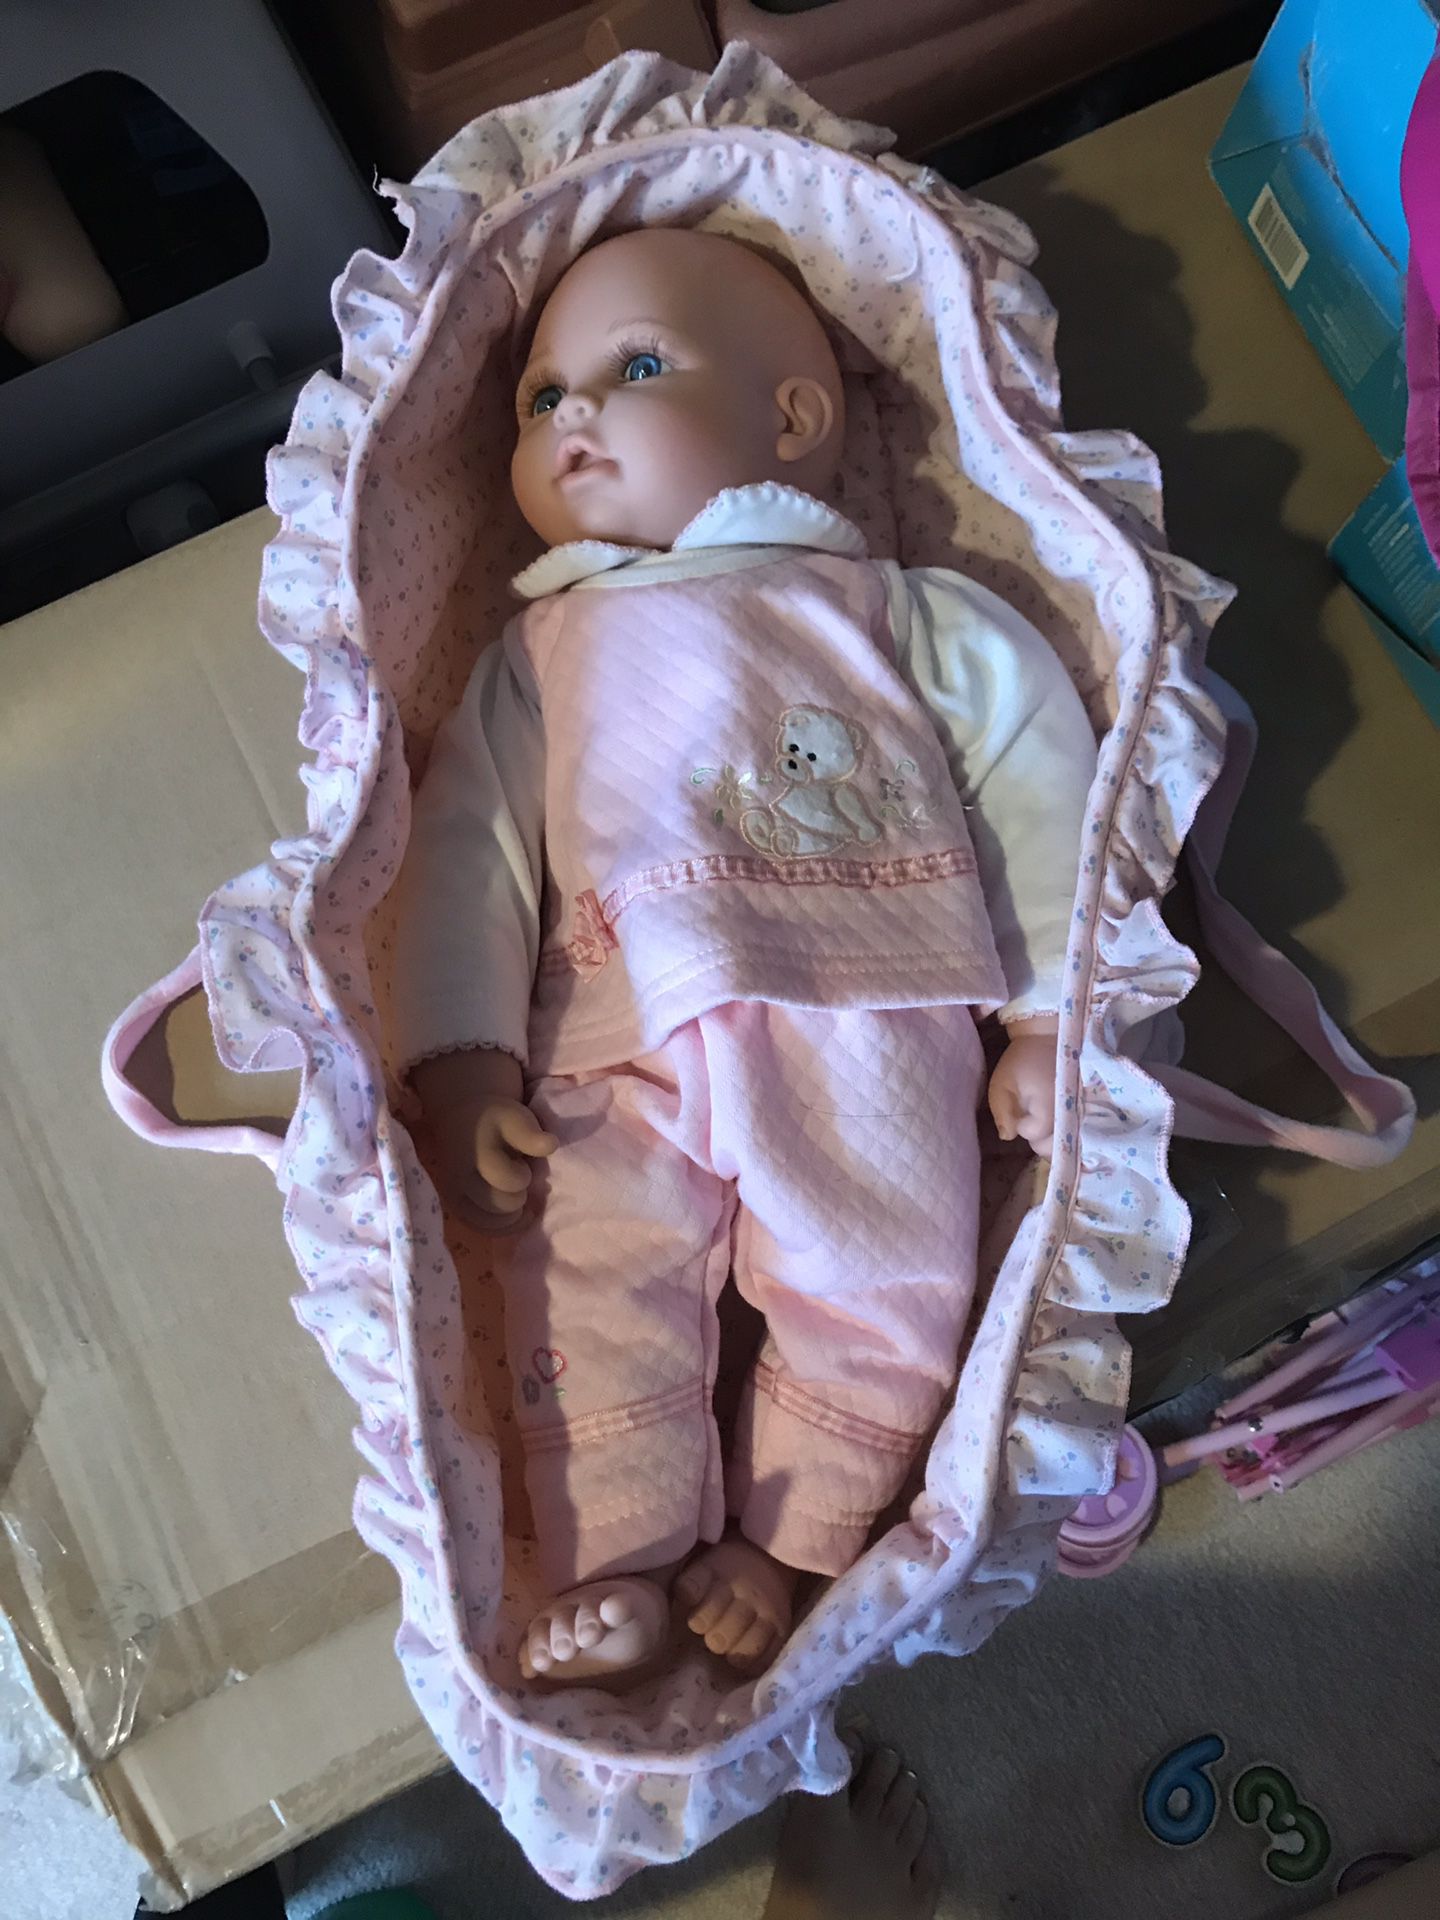 Baby doll with accessories like new